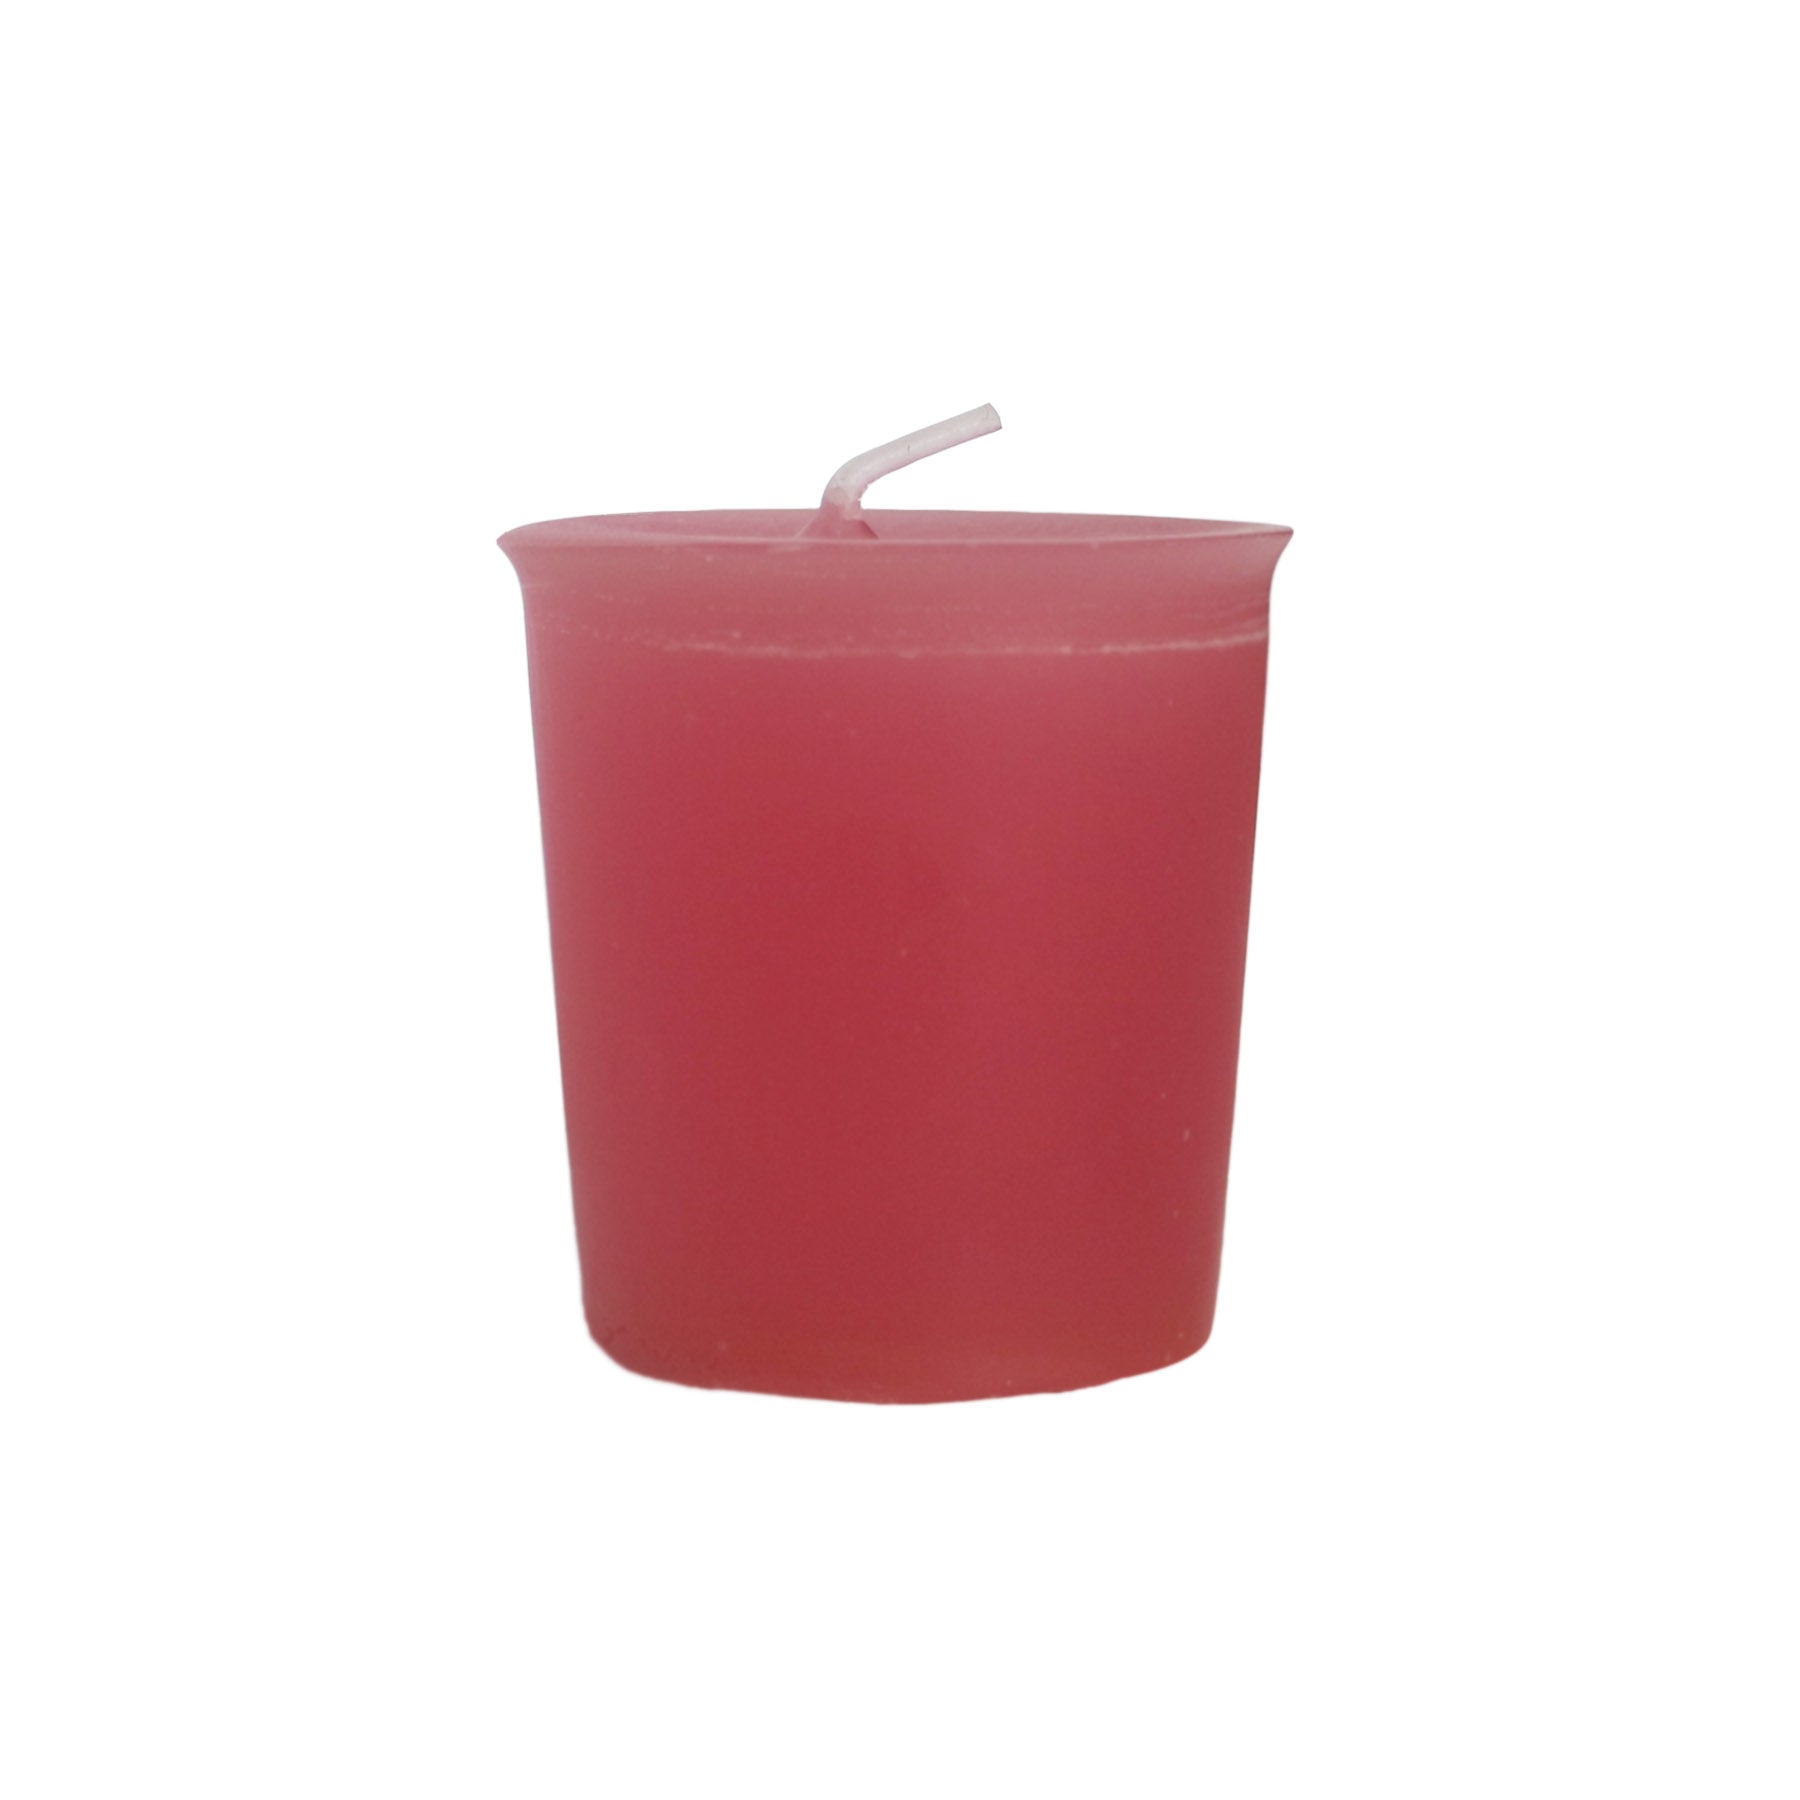 Summer Nights scented candle